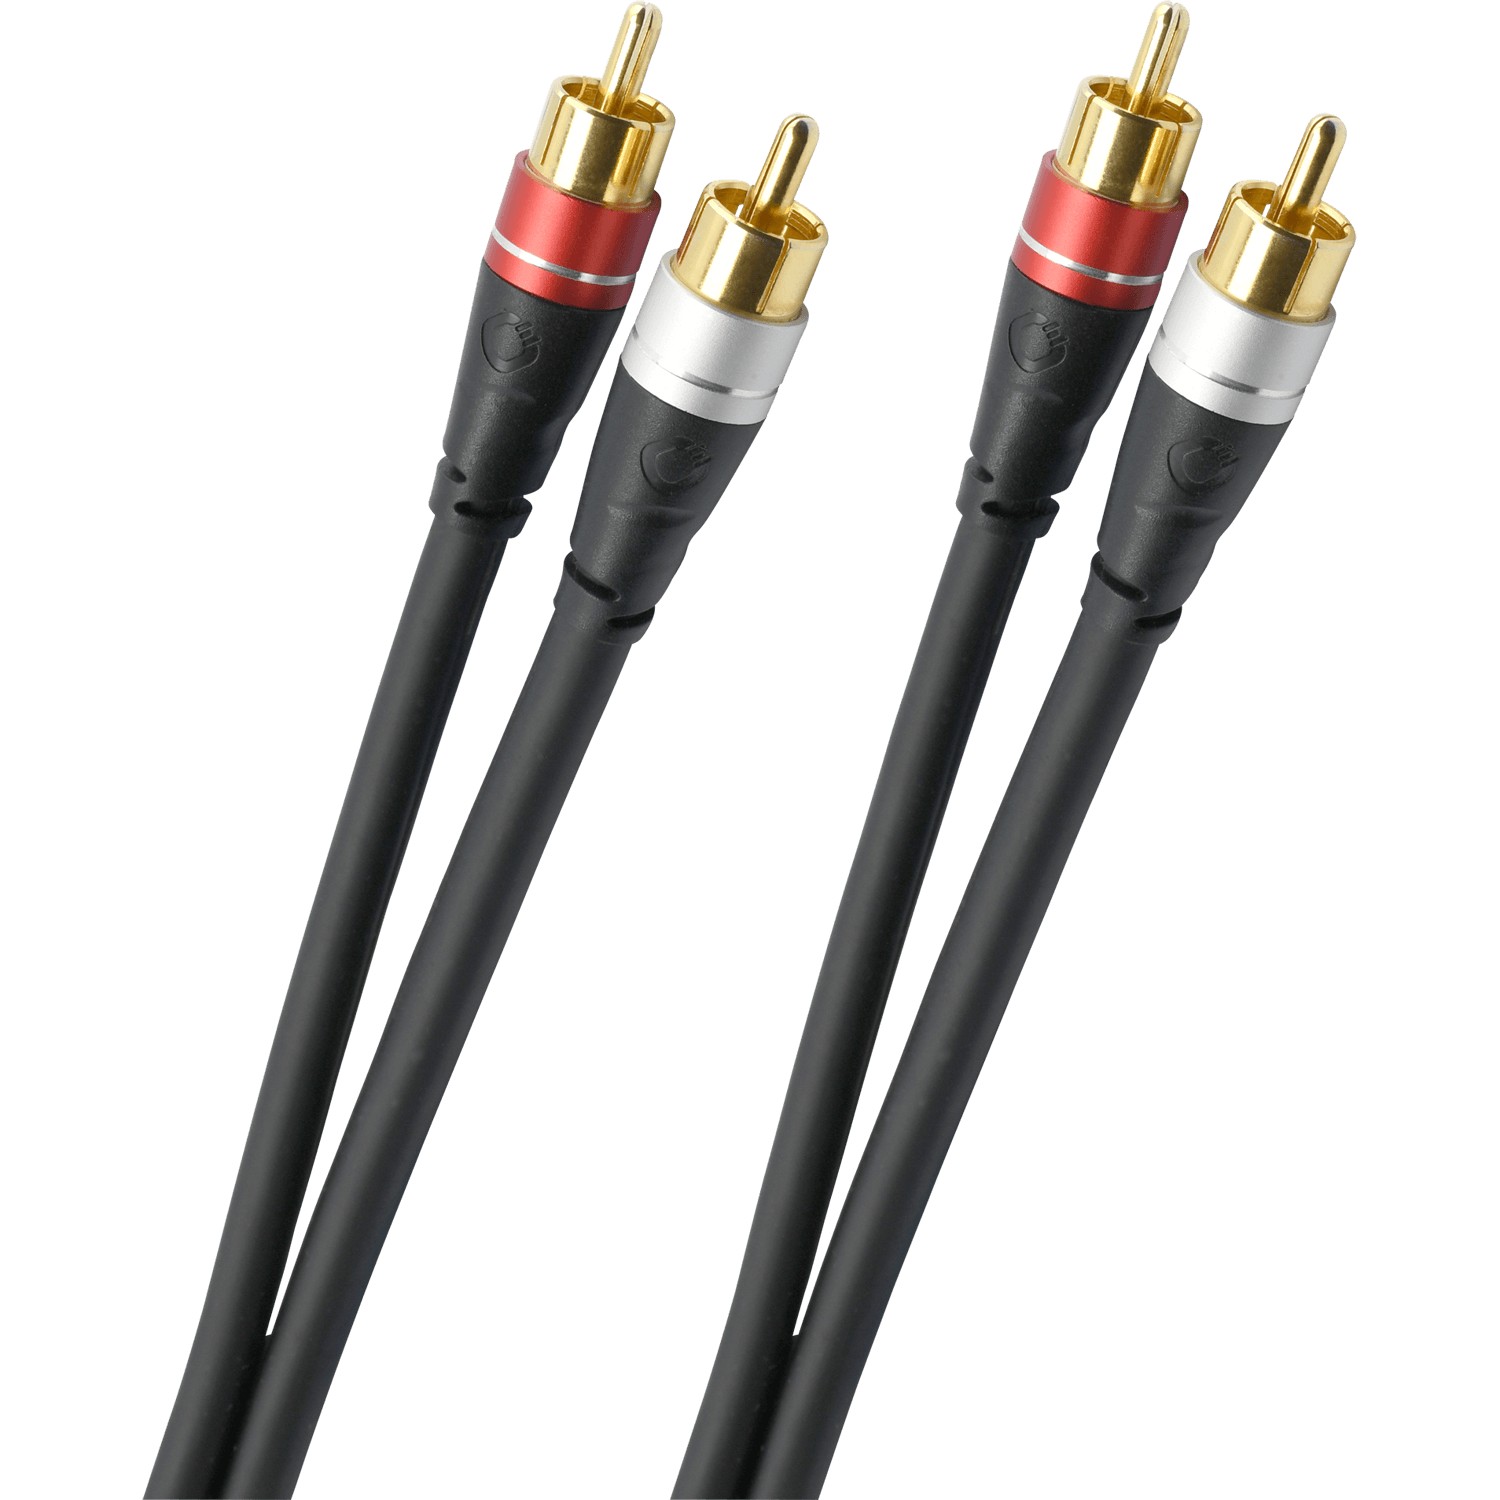 Кабели межблочные аудио Oehlbach EXCELLENCE Select Audio Link, Audio cable Cinch, 1.5m bw (D1C33143) кабели межблочные аудио oehlbach excellence select opto link toslink cable 3 0m sw d1c33134